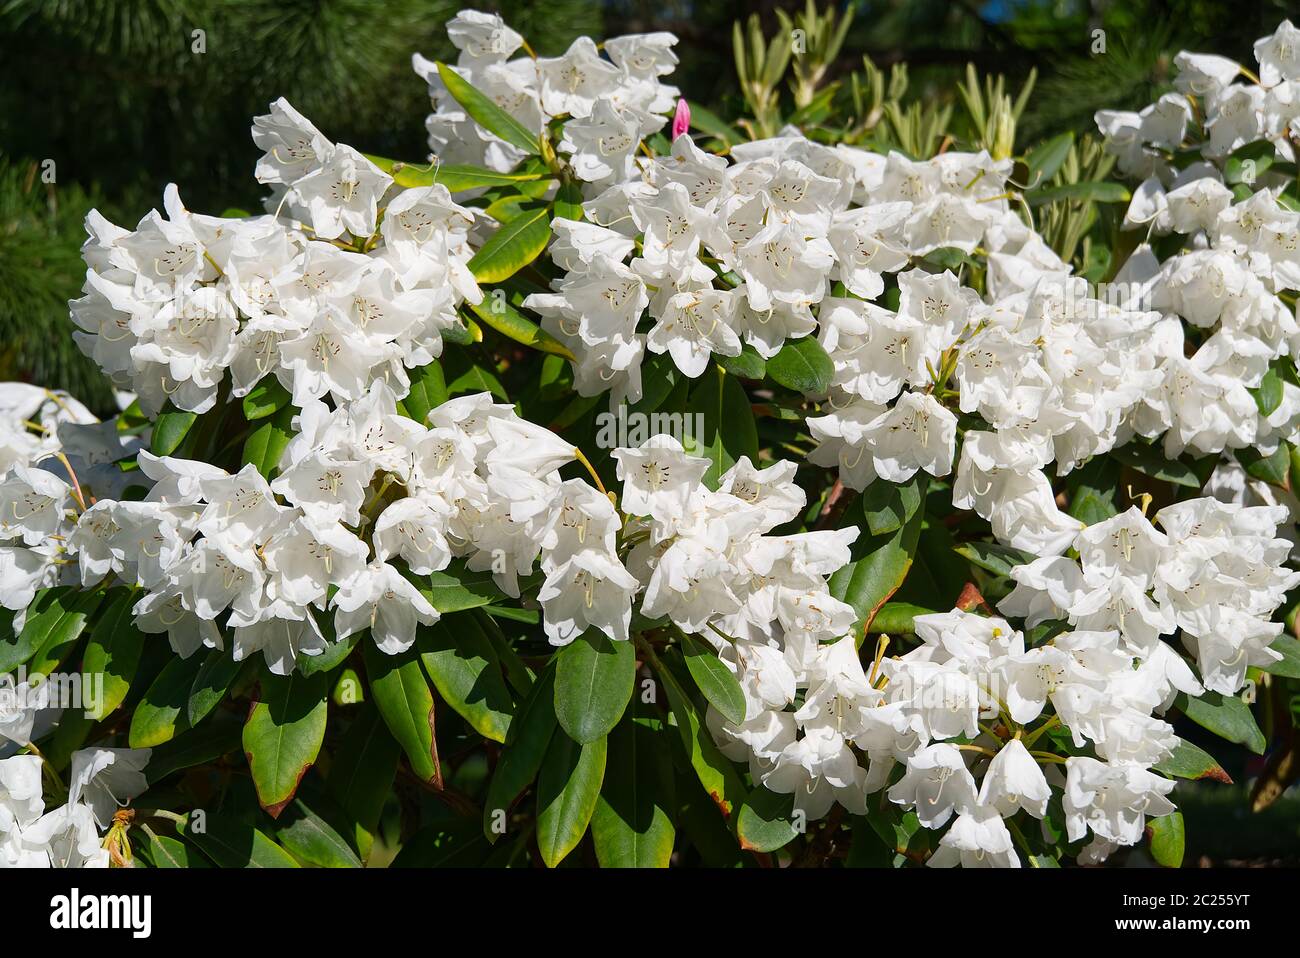 white rhododendrons close-up. Delicate white azalea Rhododendron flowers. Landscape design. Stock Photo